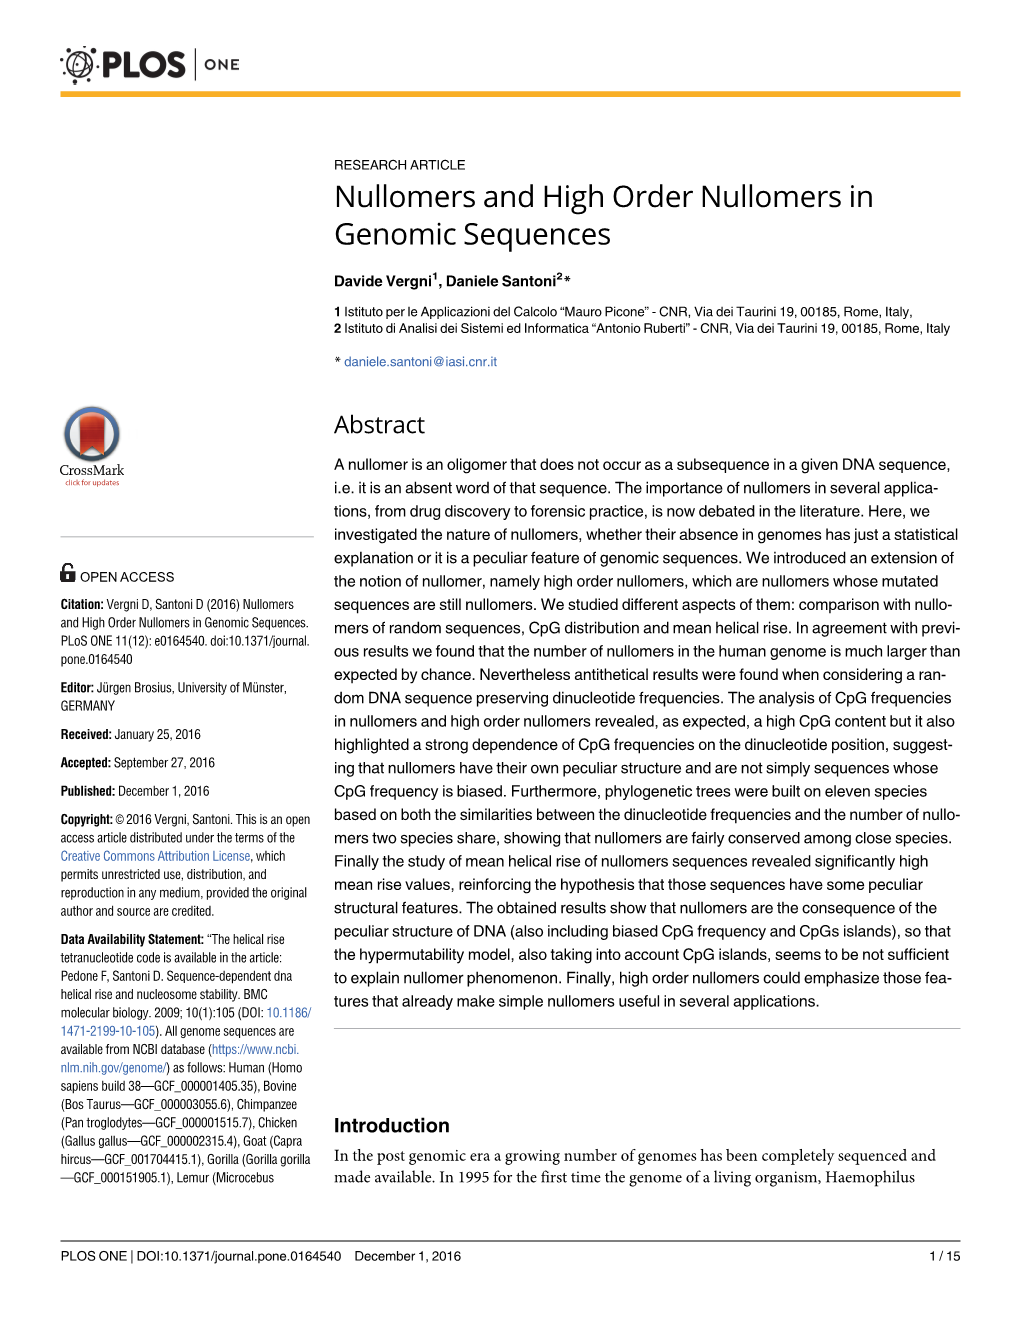 Nullomers and High Order Nullomers in Genomic Sequences